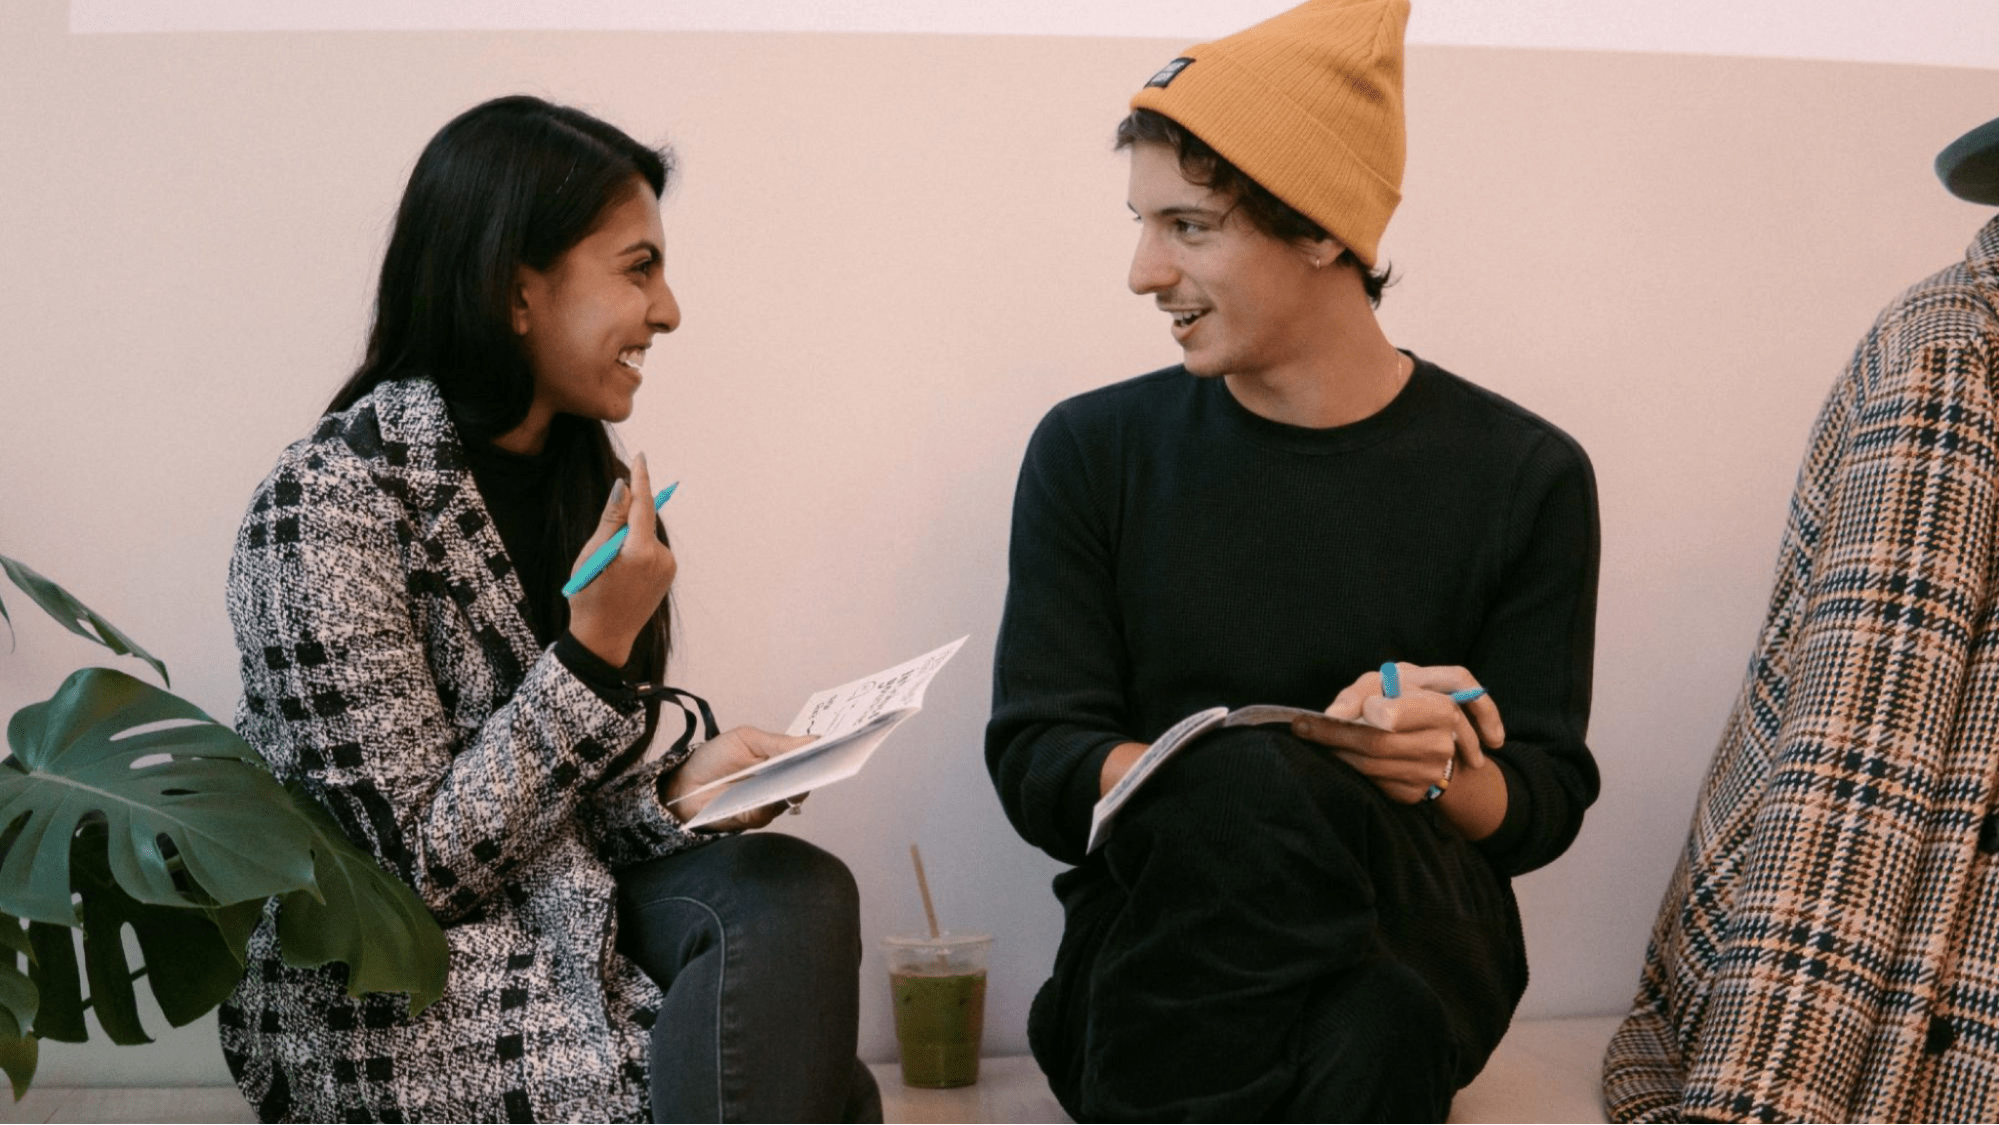 Two people talking and laughing with notebooks